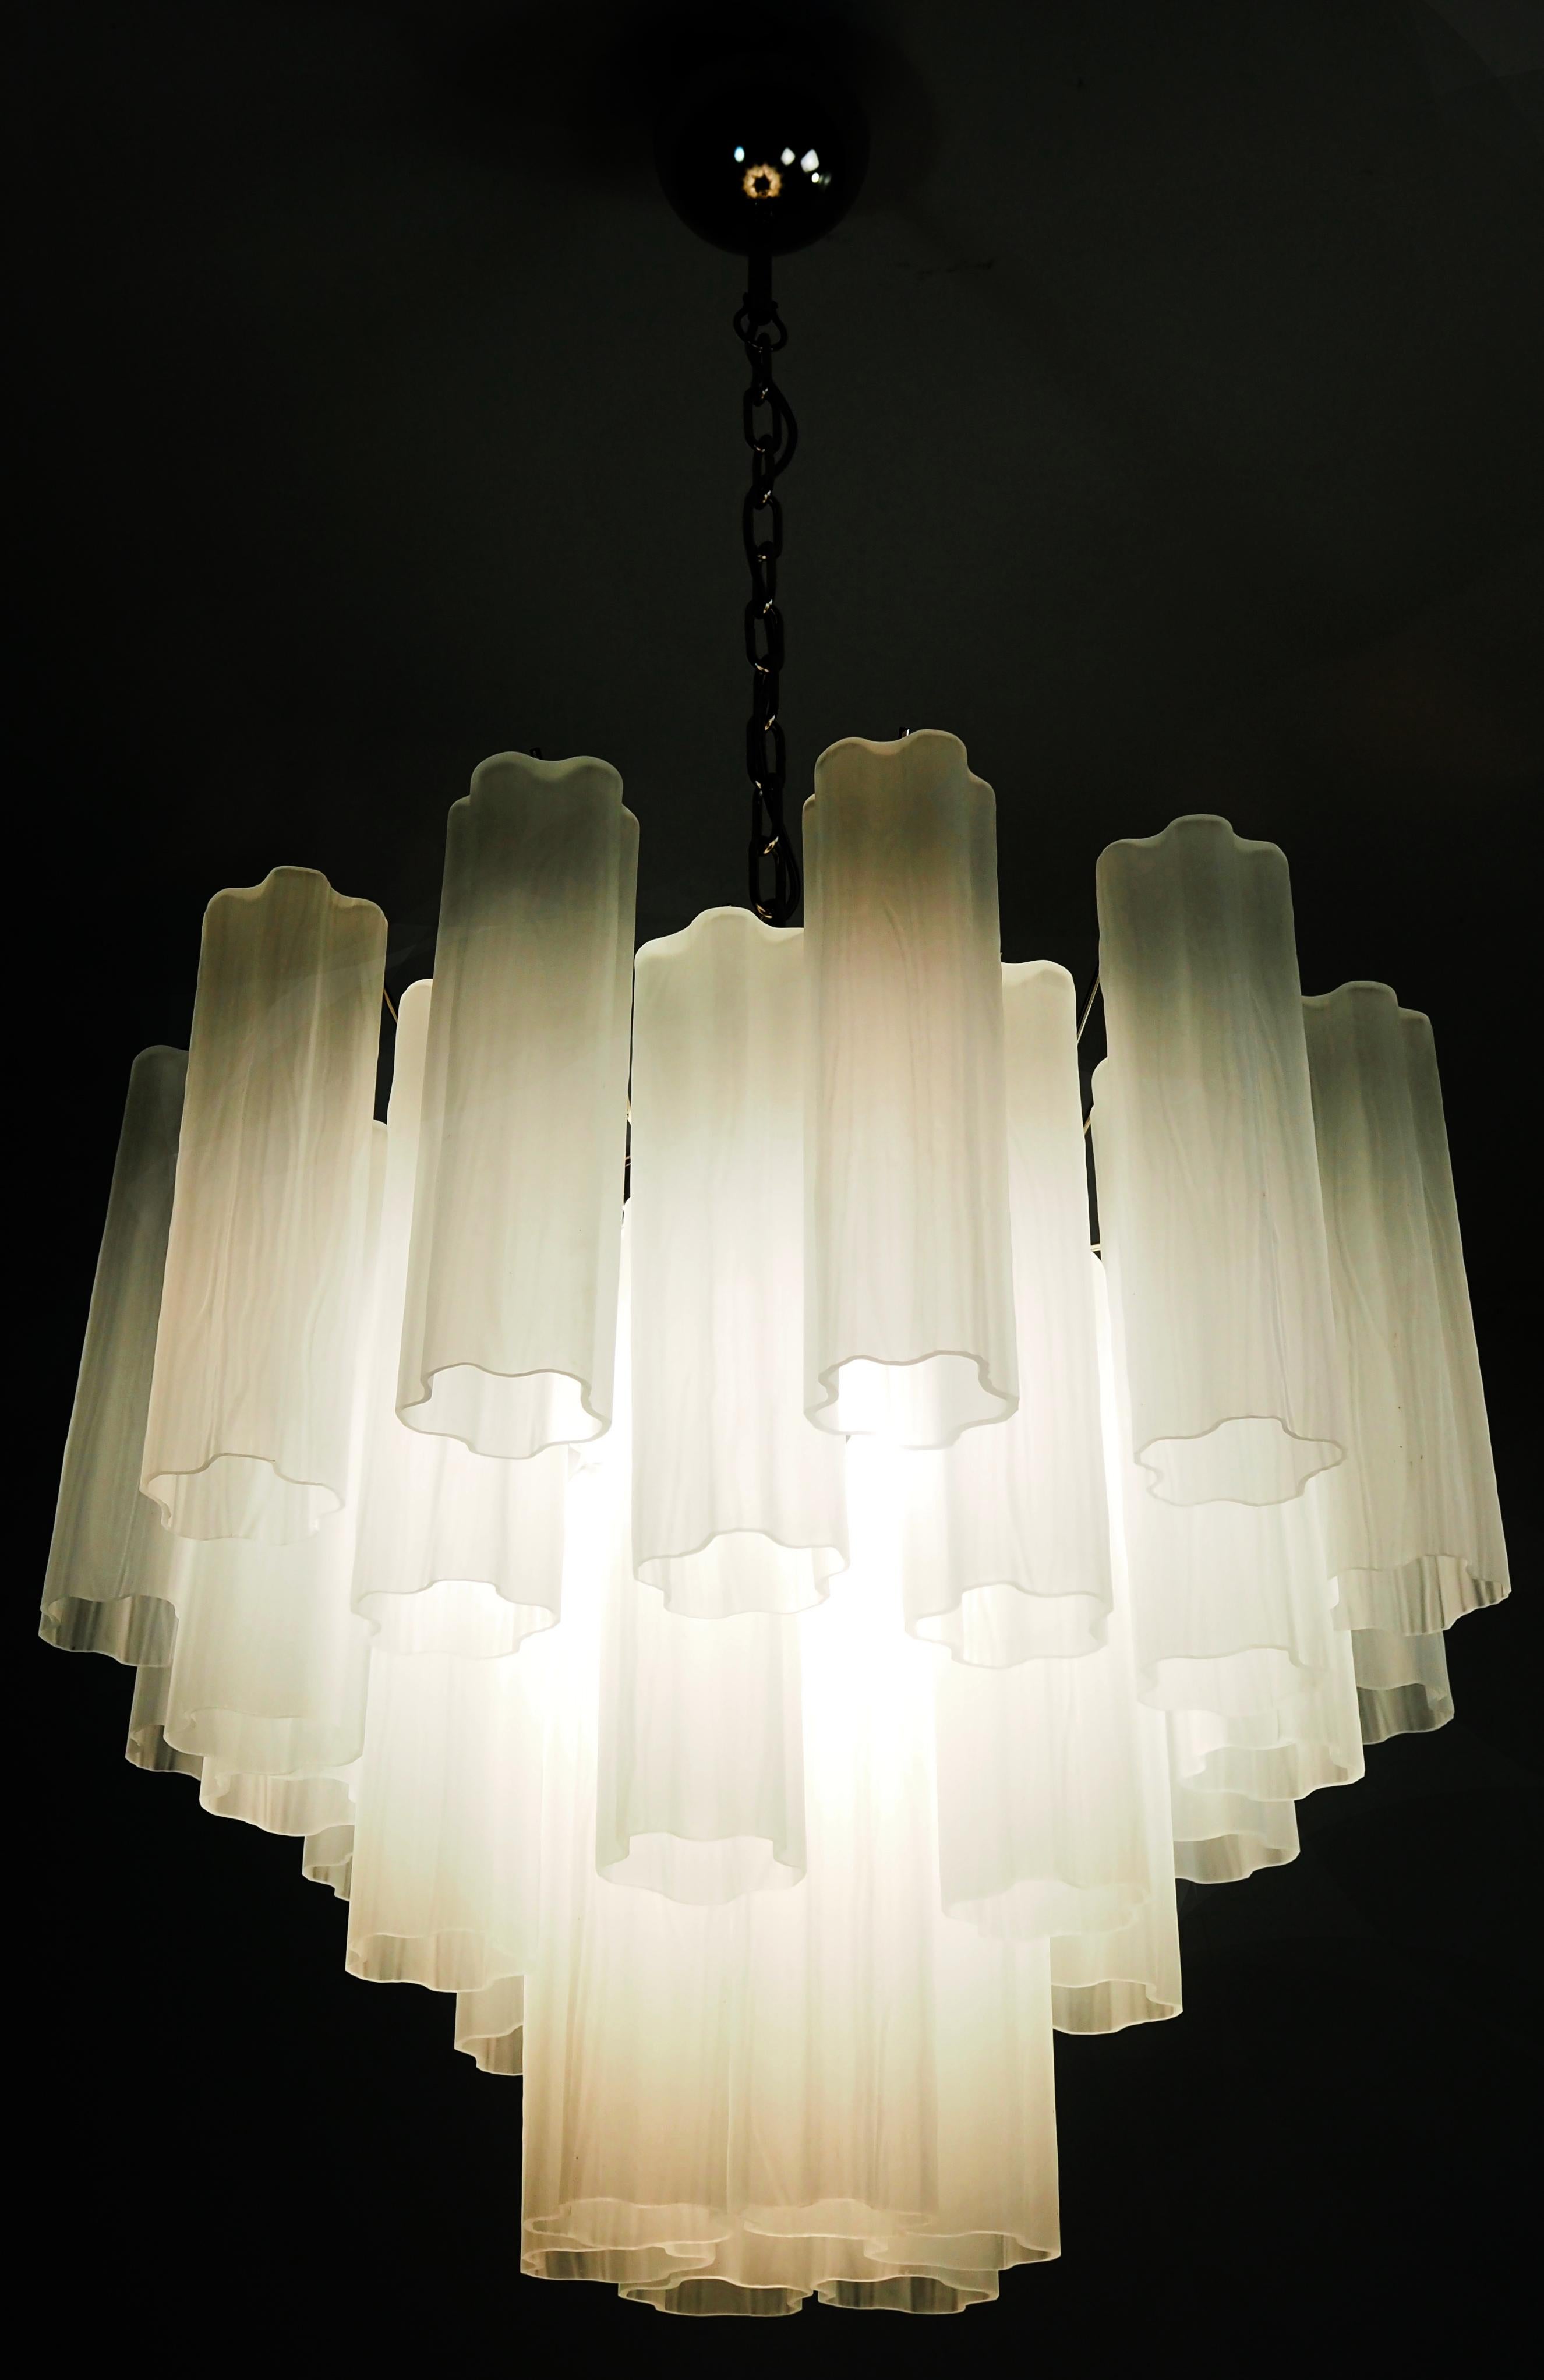 Art Glass Gorgeous Murano Glass Tube Chandelier - 36 etched glass tube For Sale